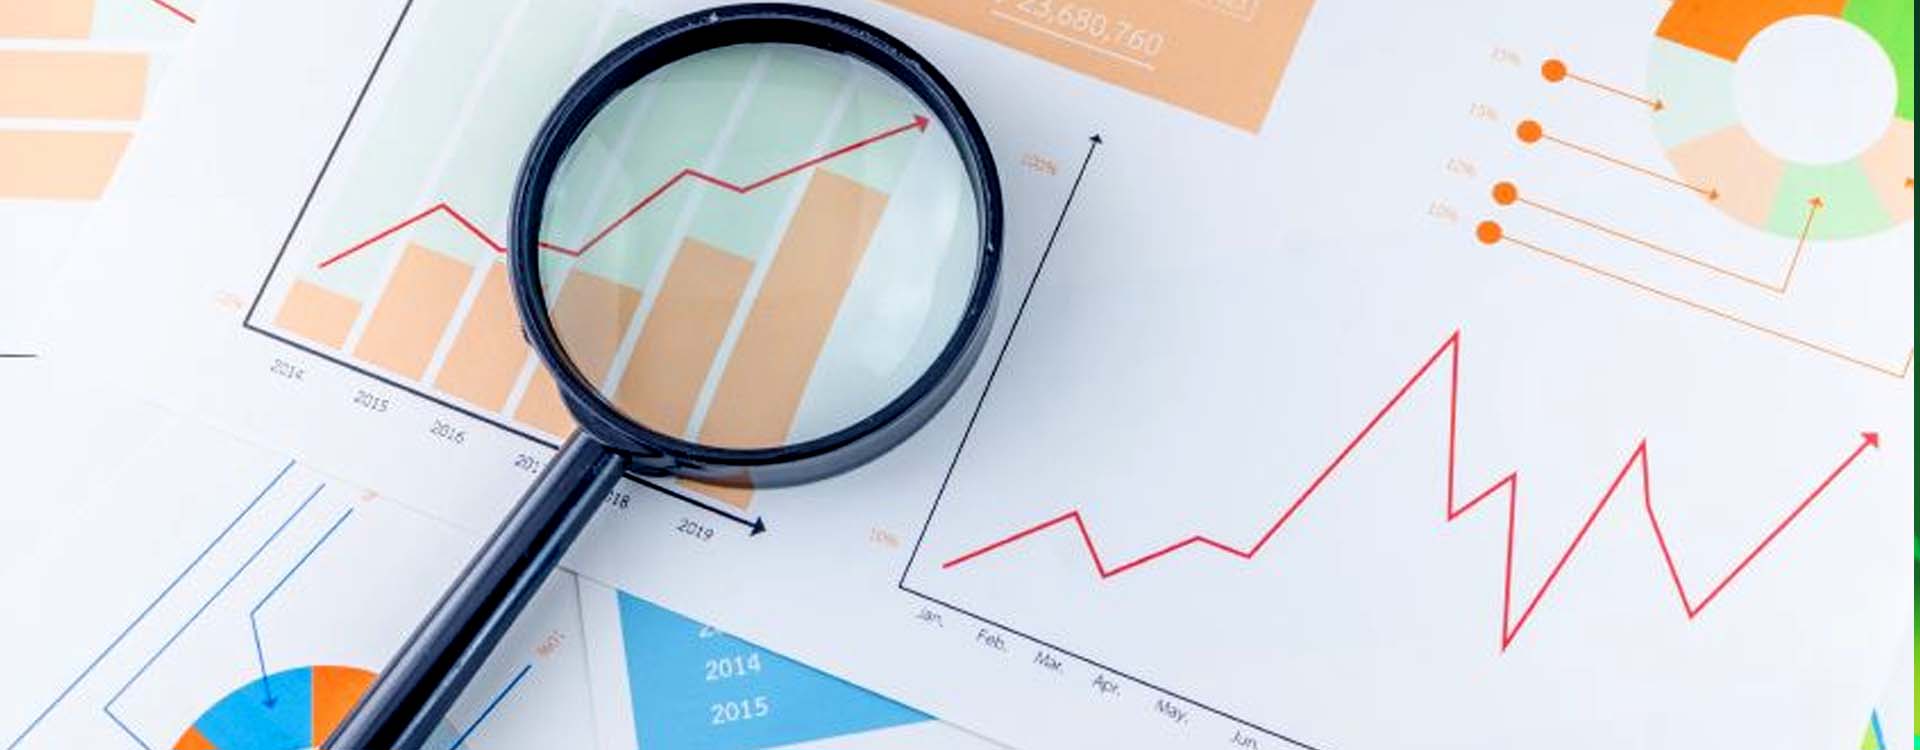 5 ESSENTIAL FINANCIAL REPORTS EVERY SMALL BUSINESS OWNER SHOULD KNOW